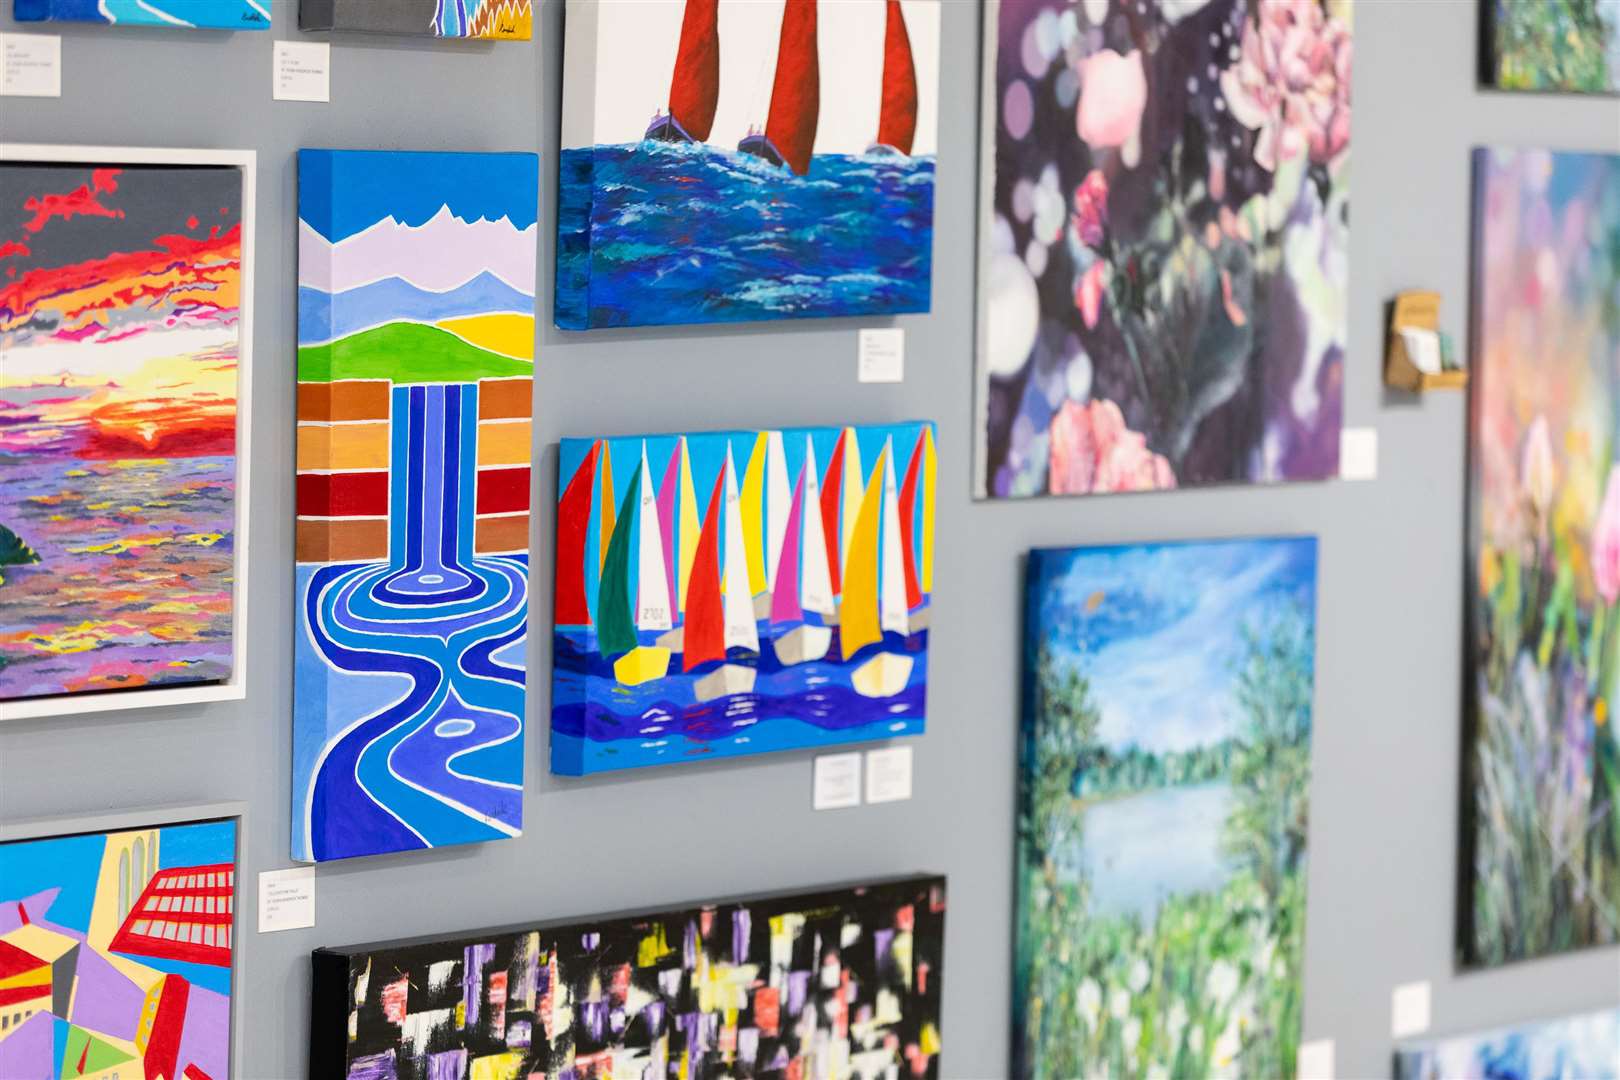 Over 60 artists from across Kent are showcased. Picture: Alanna Hagan